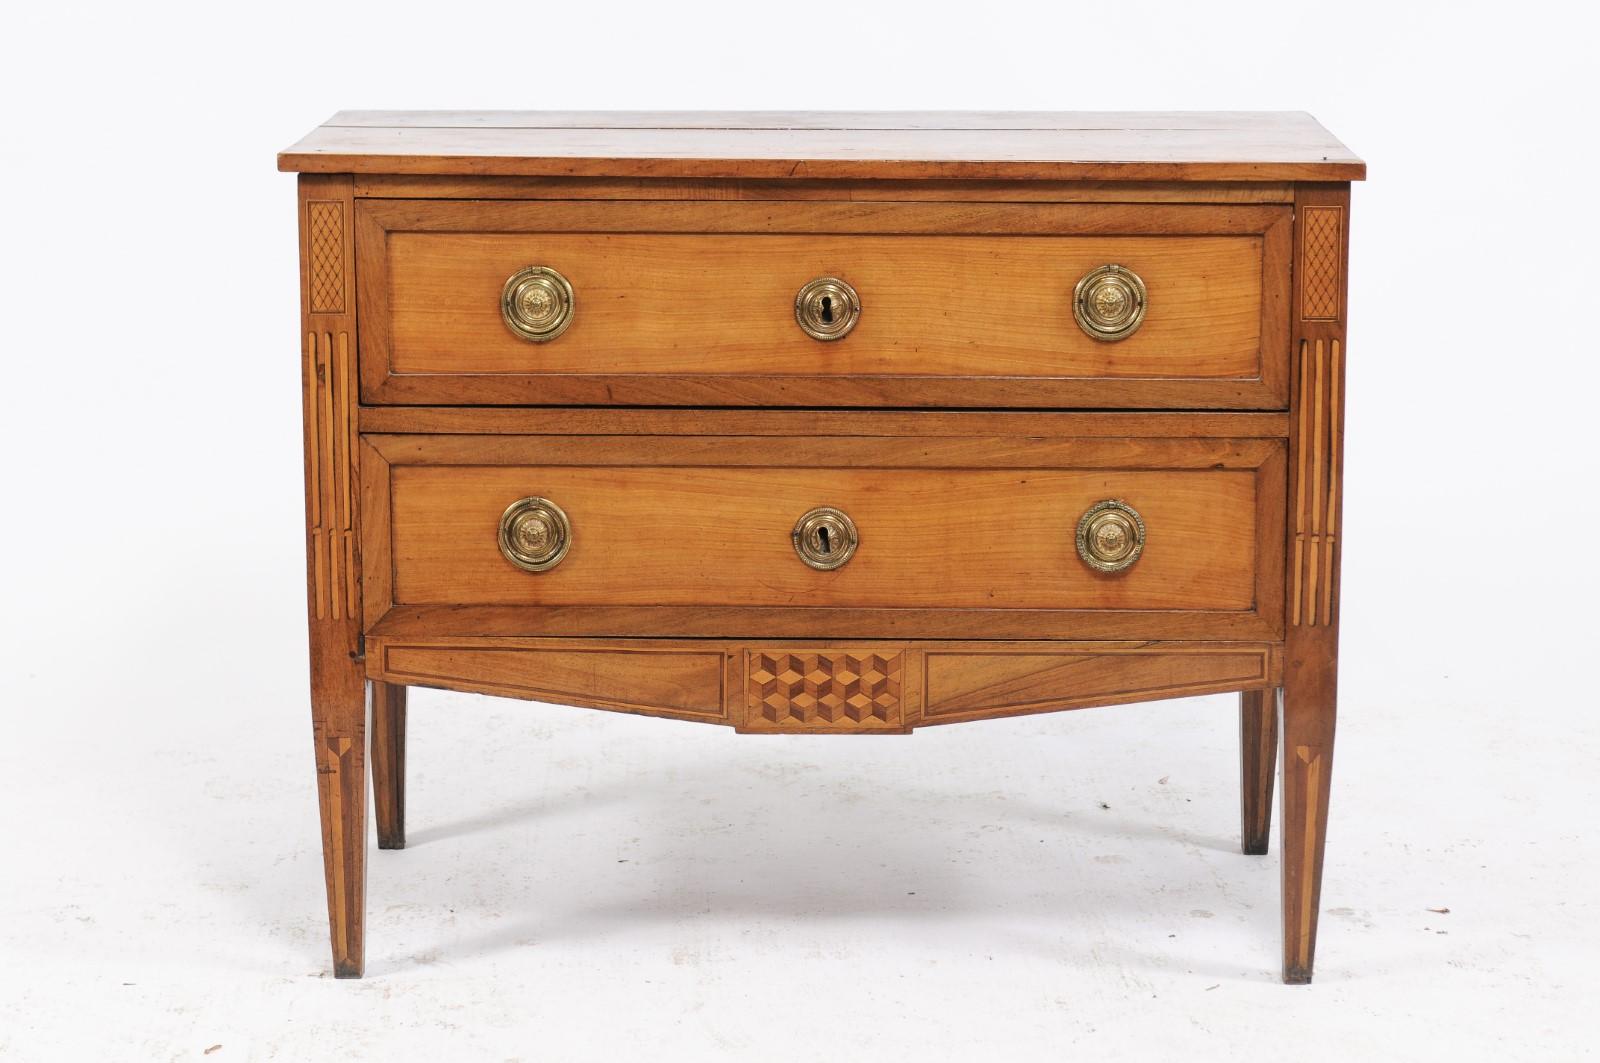 A French Louis XVI style pine and walnut two-drawer commode from the late 19th century with marquetry motifs, fluted side posts and original hardware. Born in Lyon during the last quarter of the 19th century, this beautifully proportioned Louis XVI